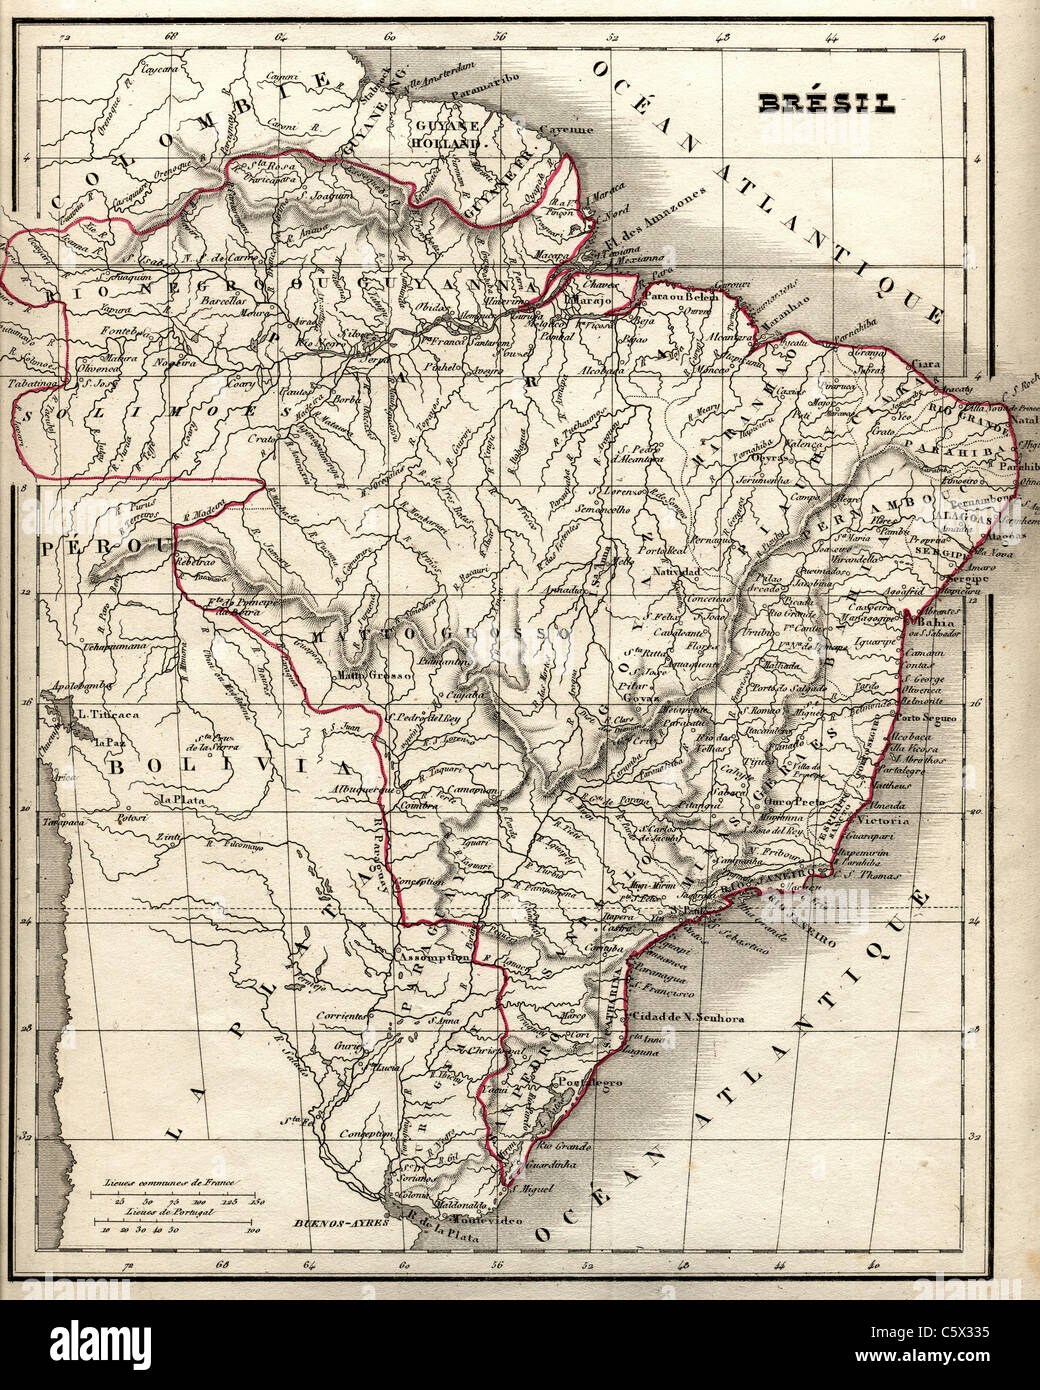 Bresil (Brazil) Antiquarian Map from 'Atlas Universel de Geographie Ancienne and Moderne' by cartographer C. V. Monin Stock Photo